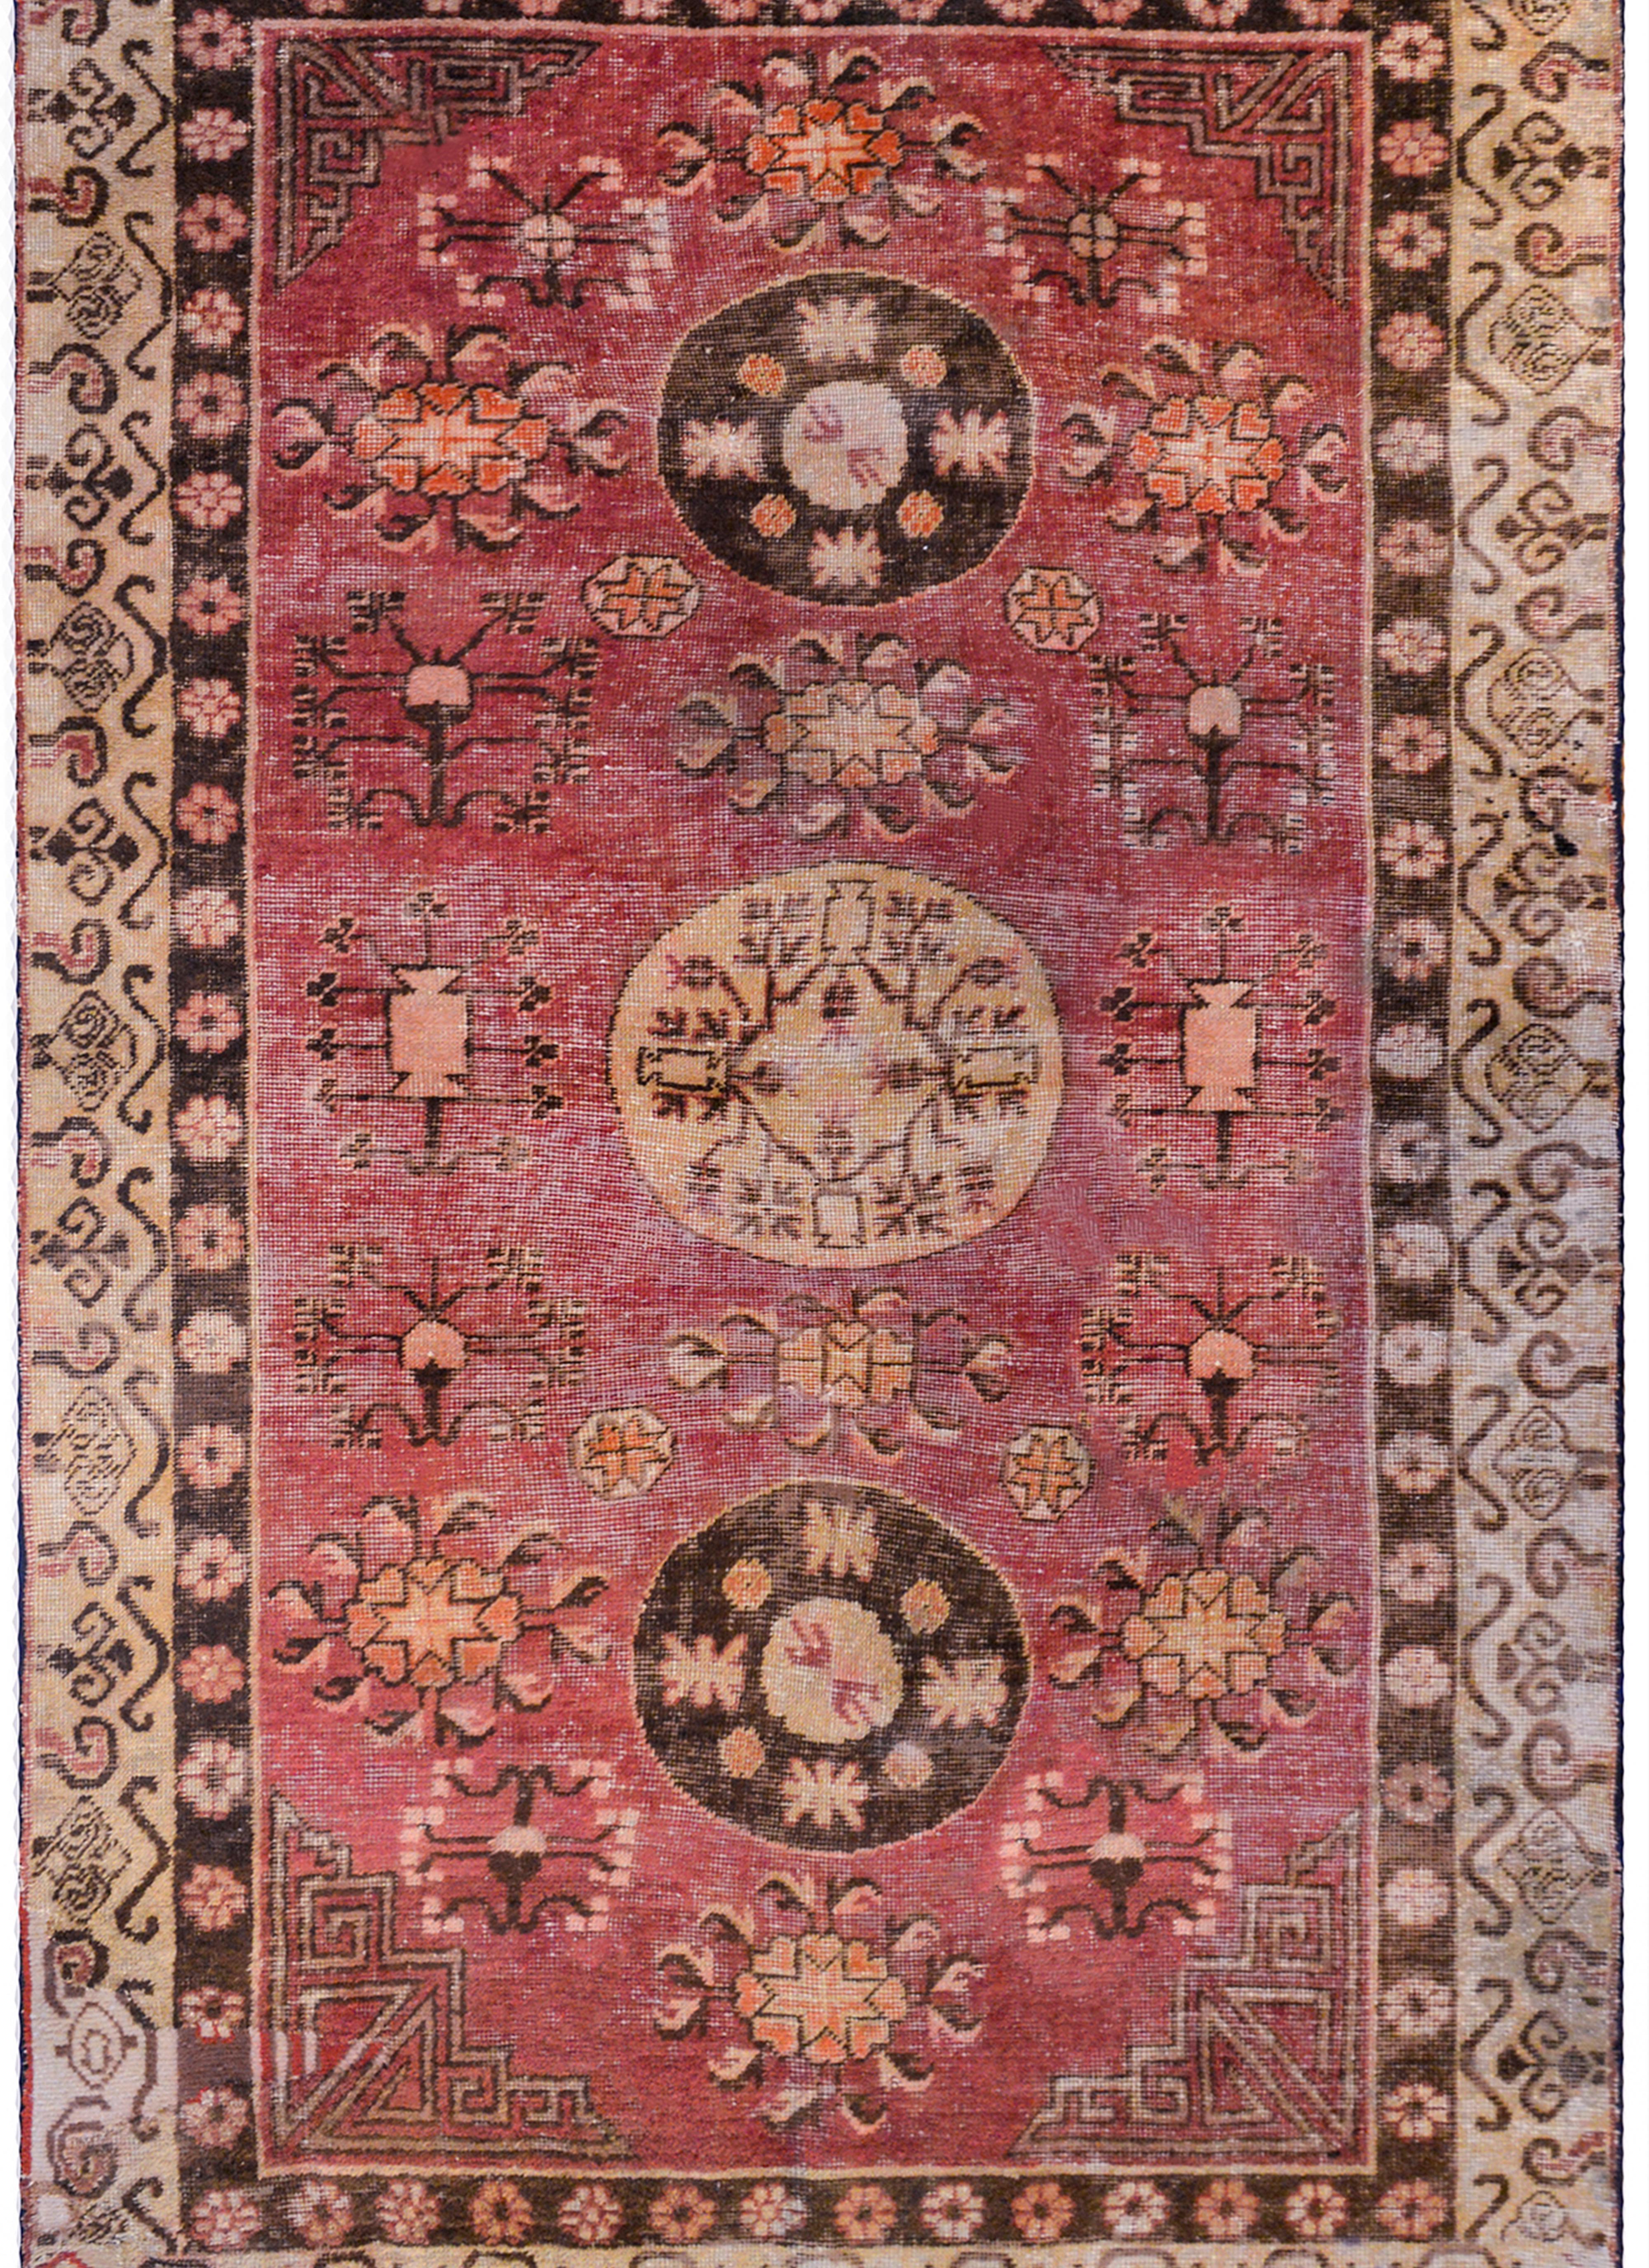 A beautiful early 20th century Central Asian Khotan rug with three round medallions each with a stylized floral pattern, amidst a field of trees-of-life on a dark cranberry field. The border is composed with two patterned borders, one with a petite